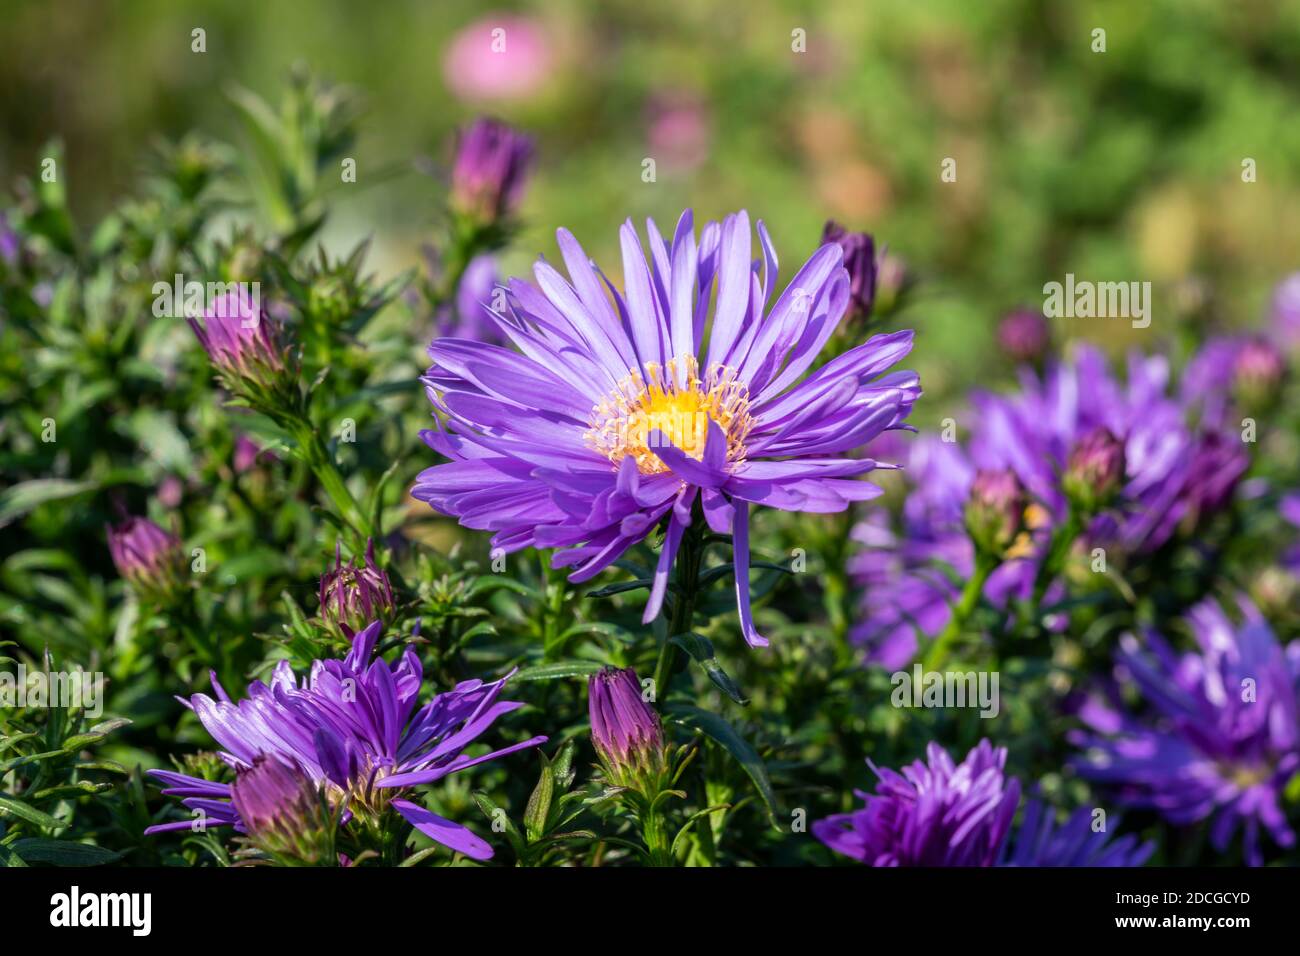 Aster 'Herfstweelde' (Autumn Wealth) a lavender blue herbaceous perennial summer autumn flower plant commonly known as Michaelmas daisy, stock photo i Stock Photo